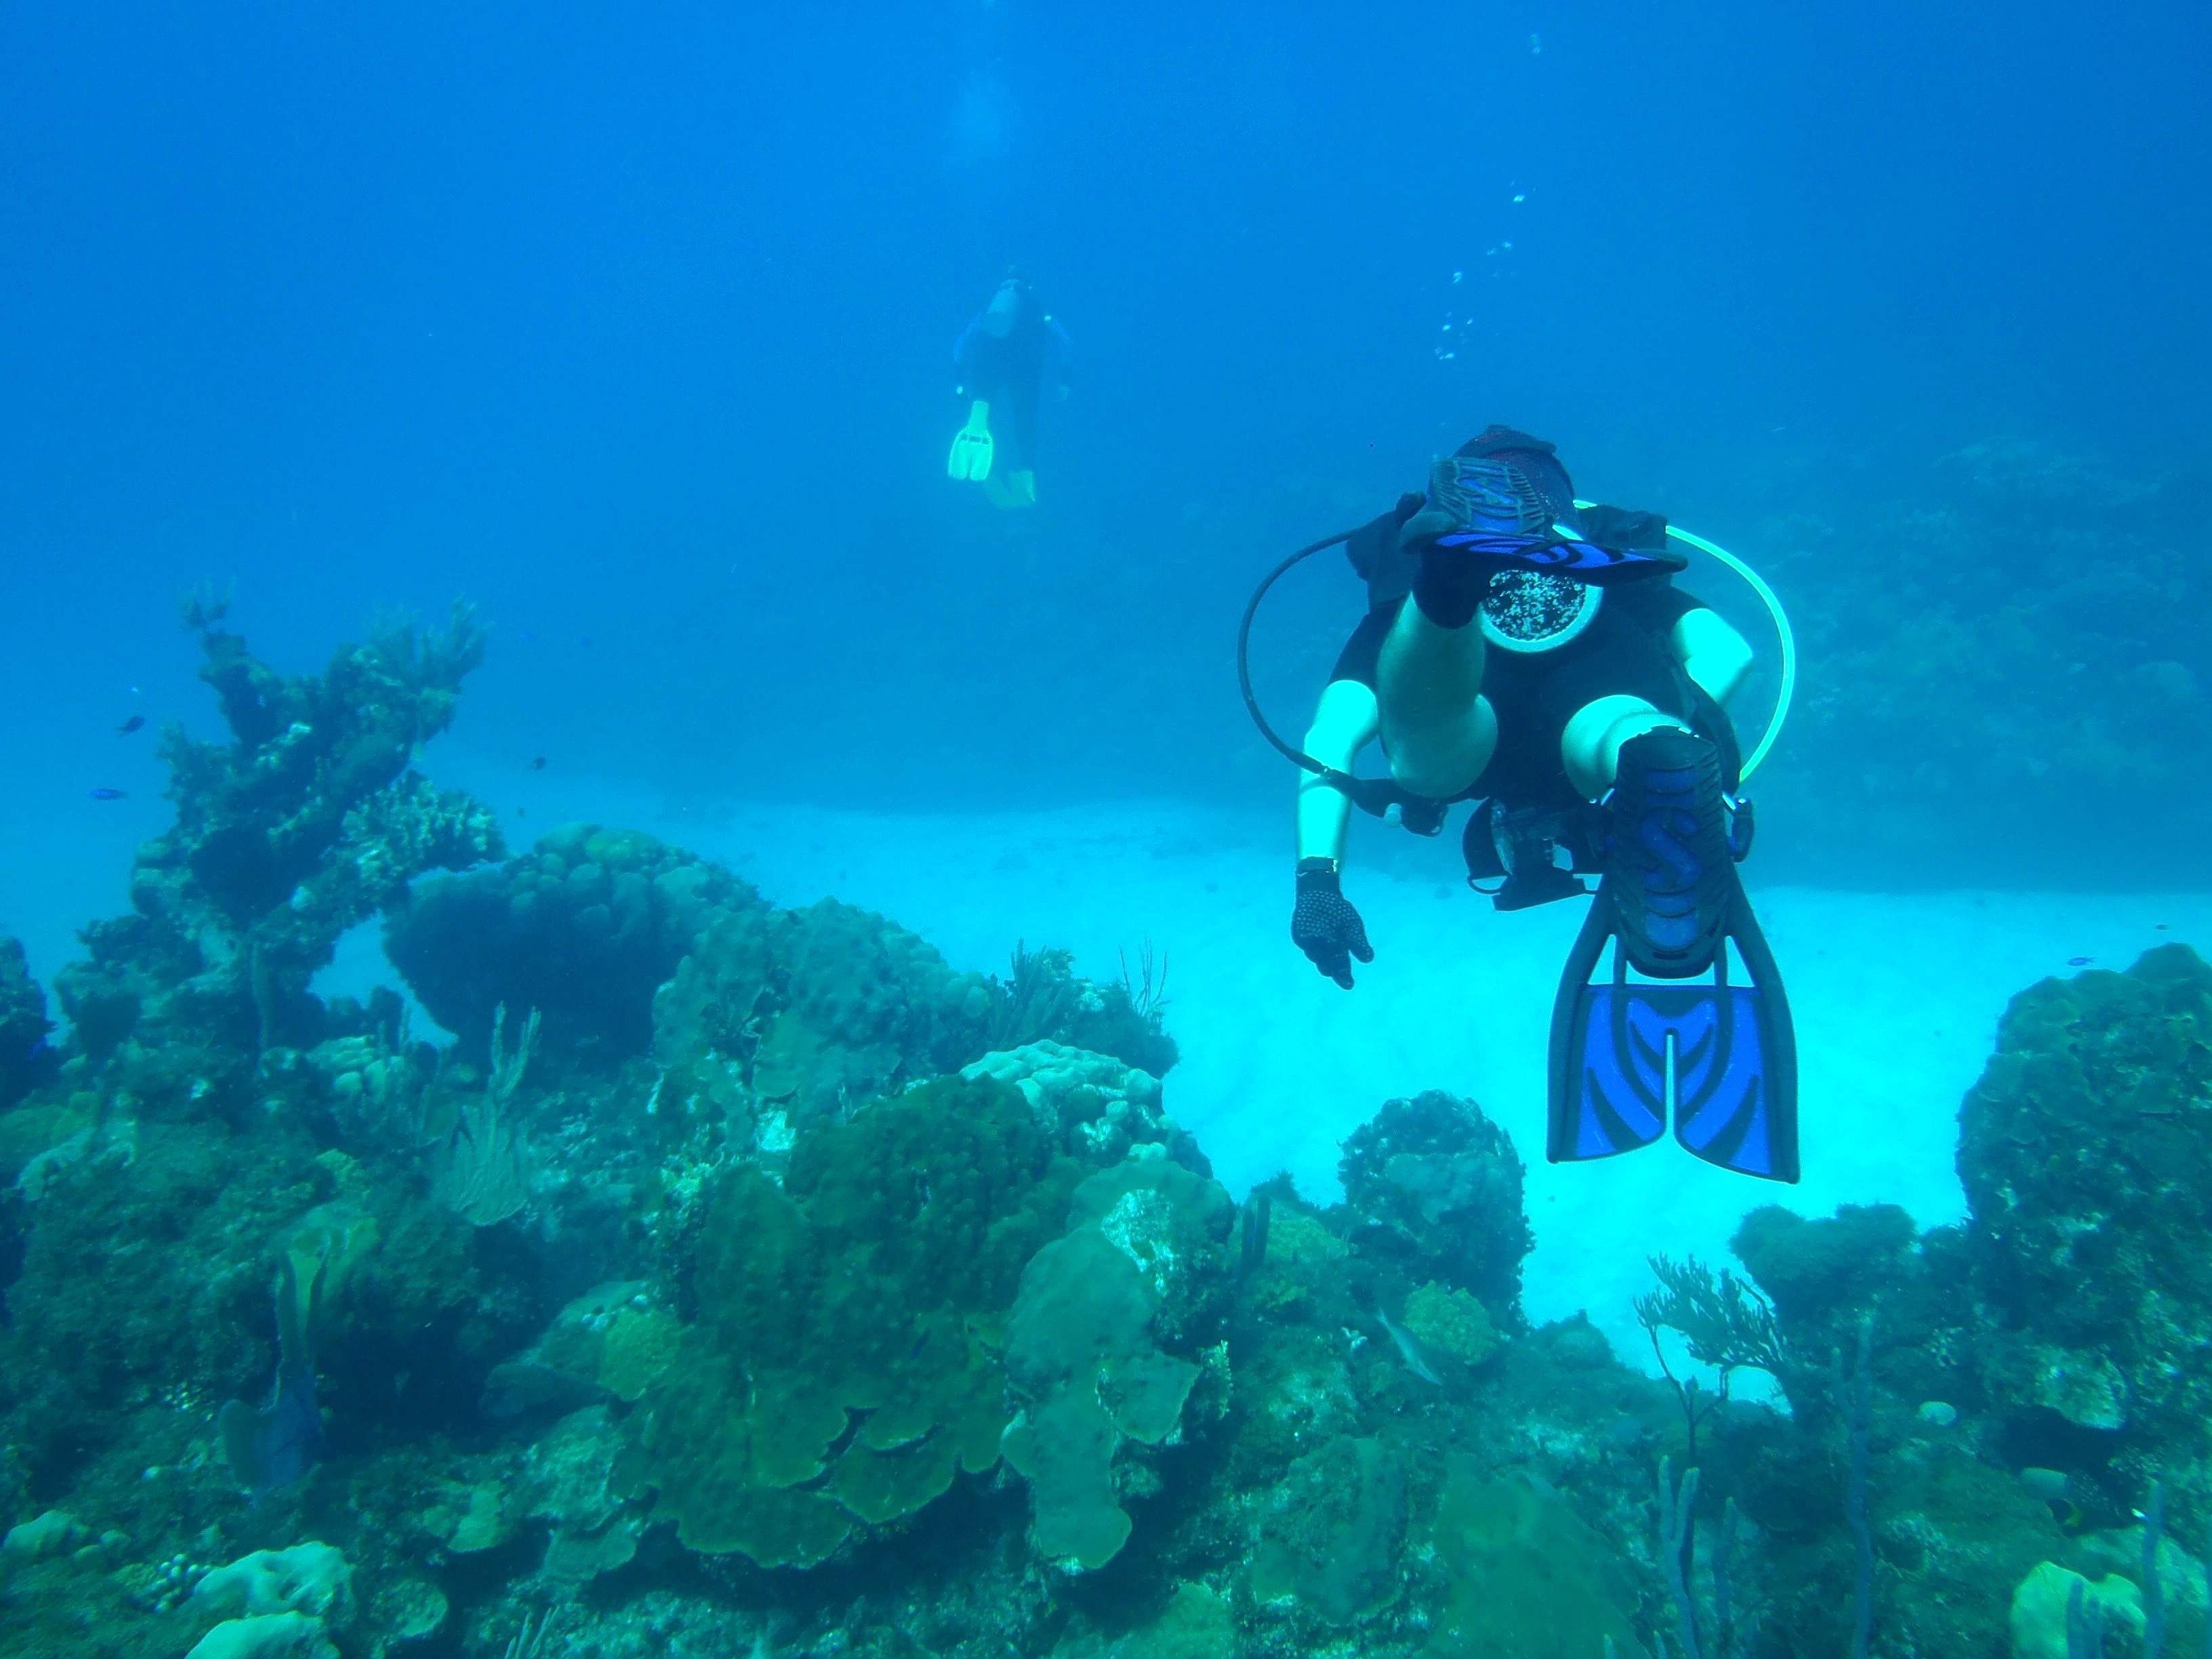 Recreational divers at Cuzco Beach, one of the most pristine marine sites on base.